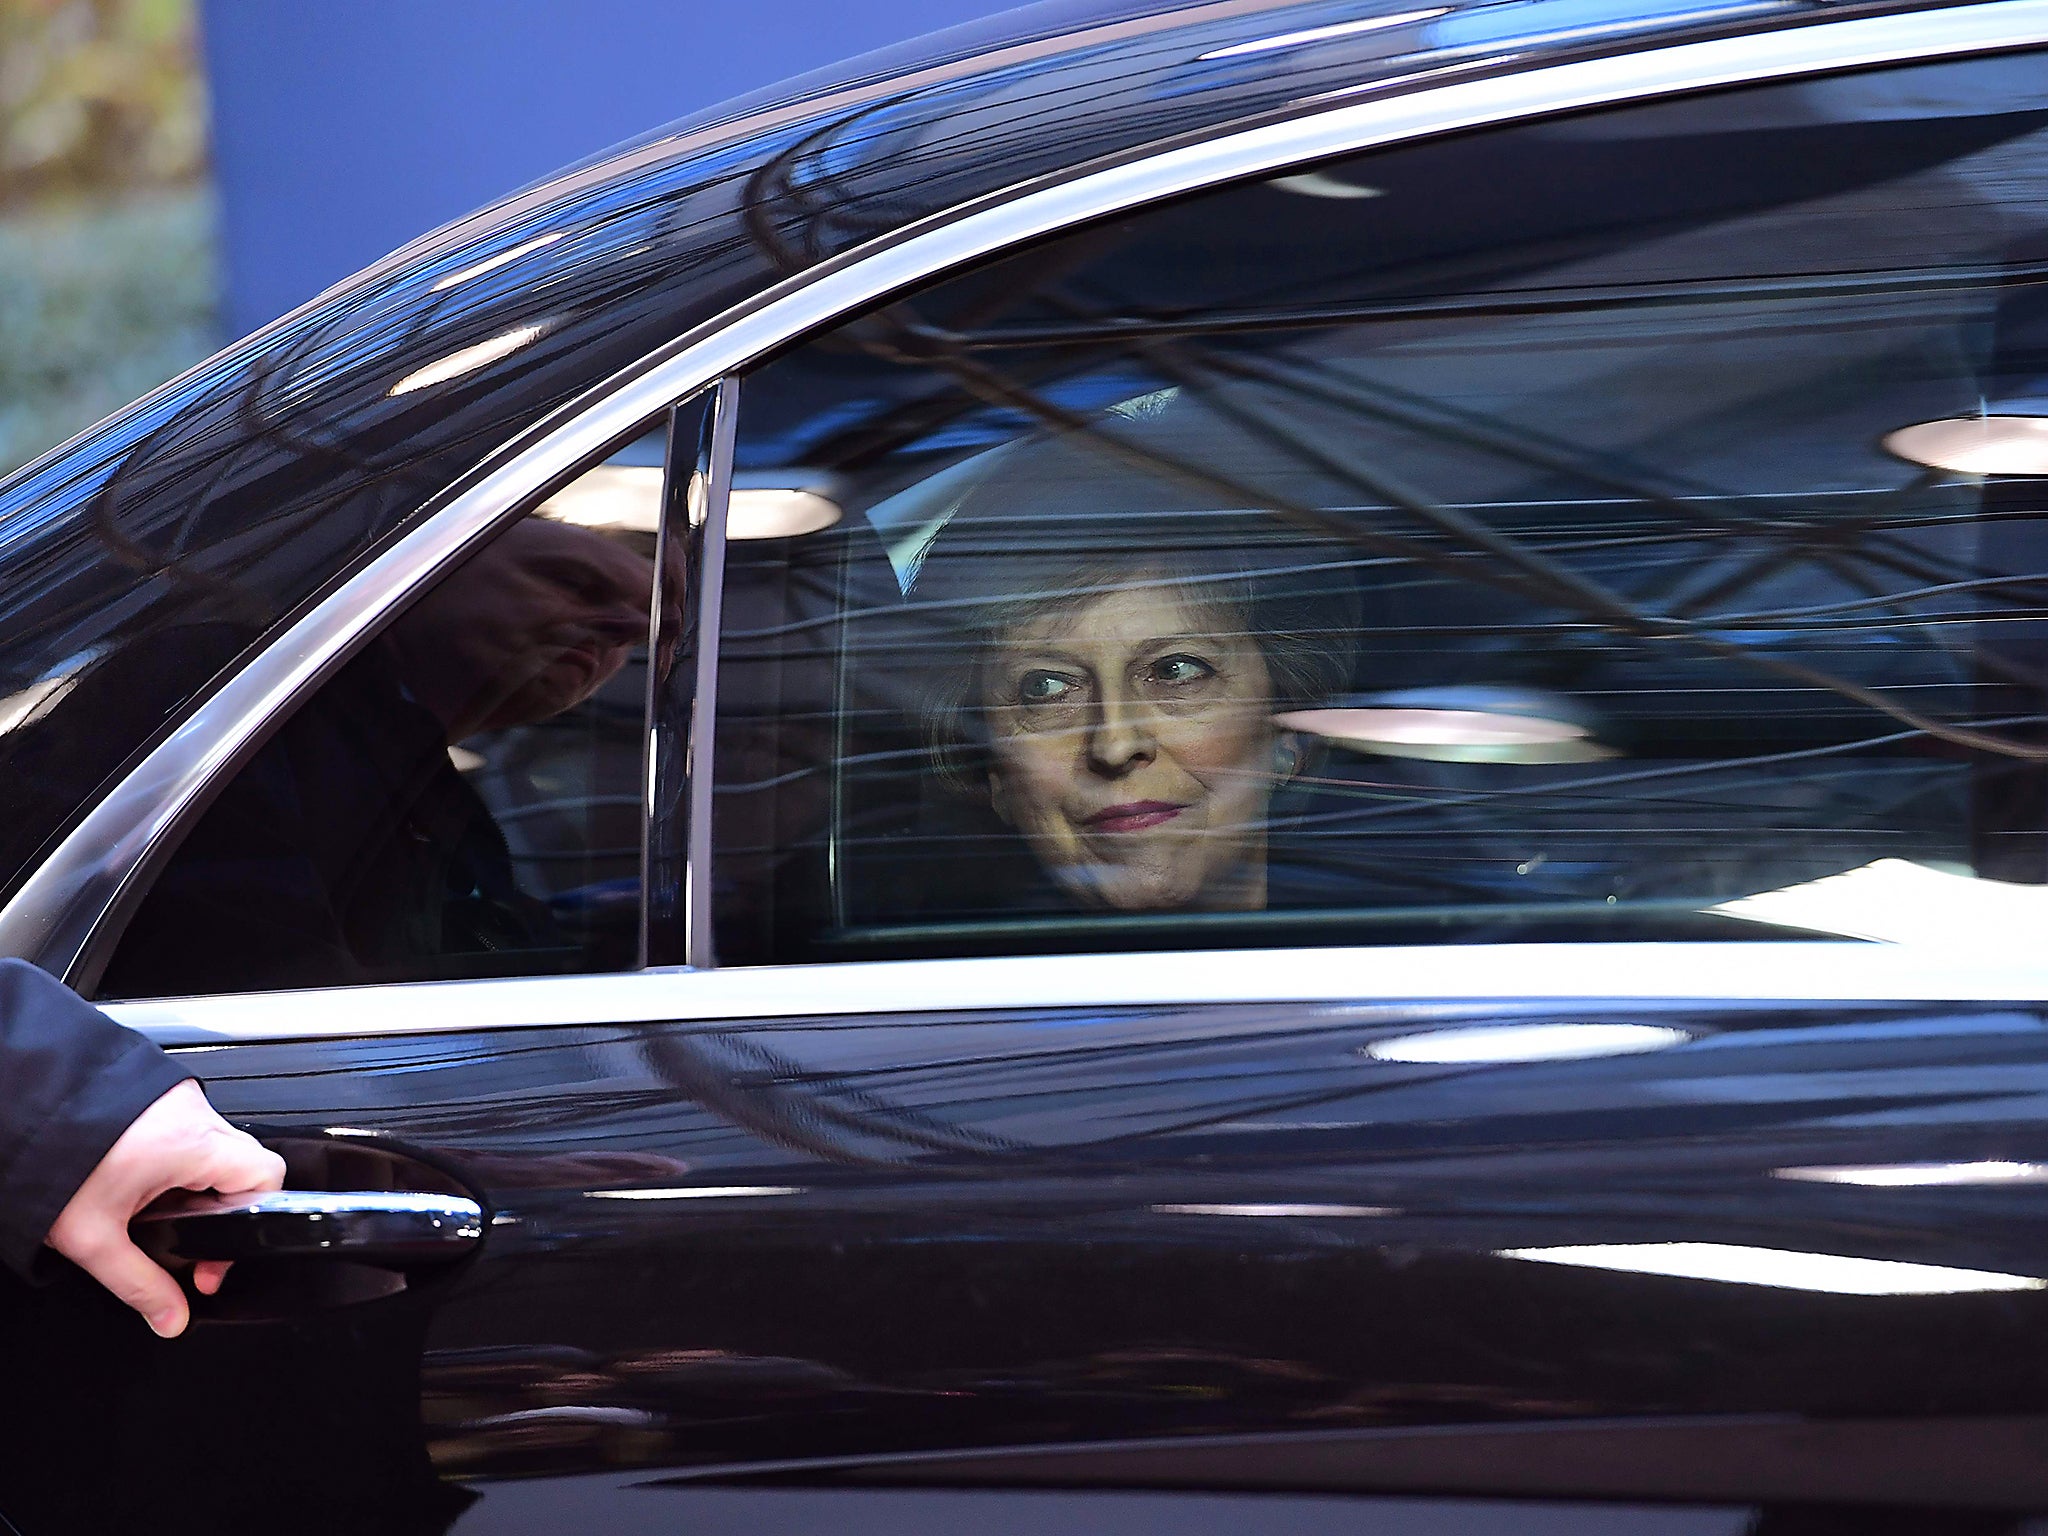 British Prime Minister Theresa May arrives for a European Union leaders summit focused on Russia sanctions and migration at the European Council in Brussels